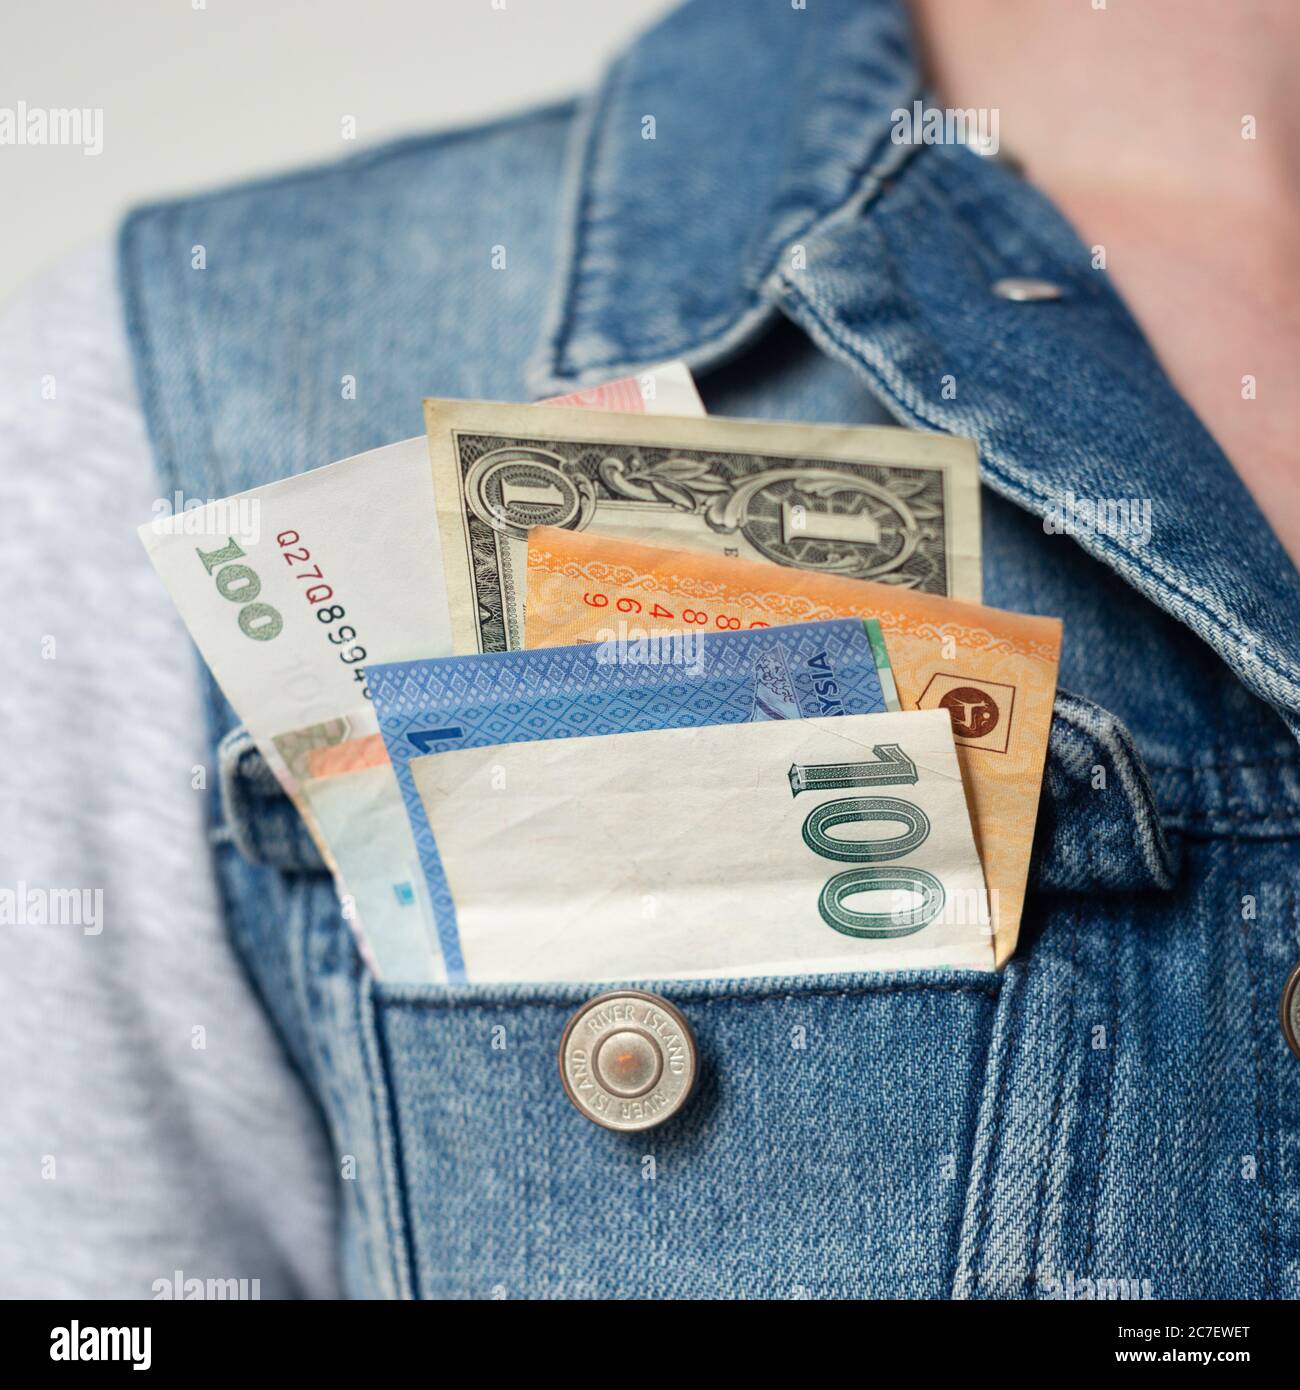 Banknotes or bills of various currencies in pocket, concept, travel, traveller, around the world, trip, globetrotter, see the world, vacation, holiday Stock Photo